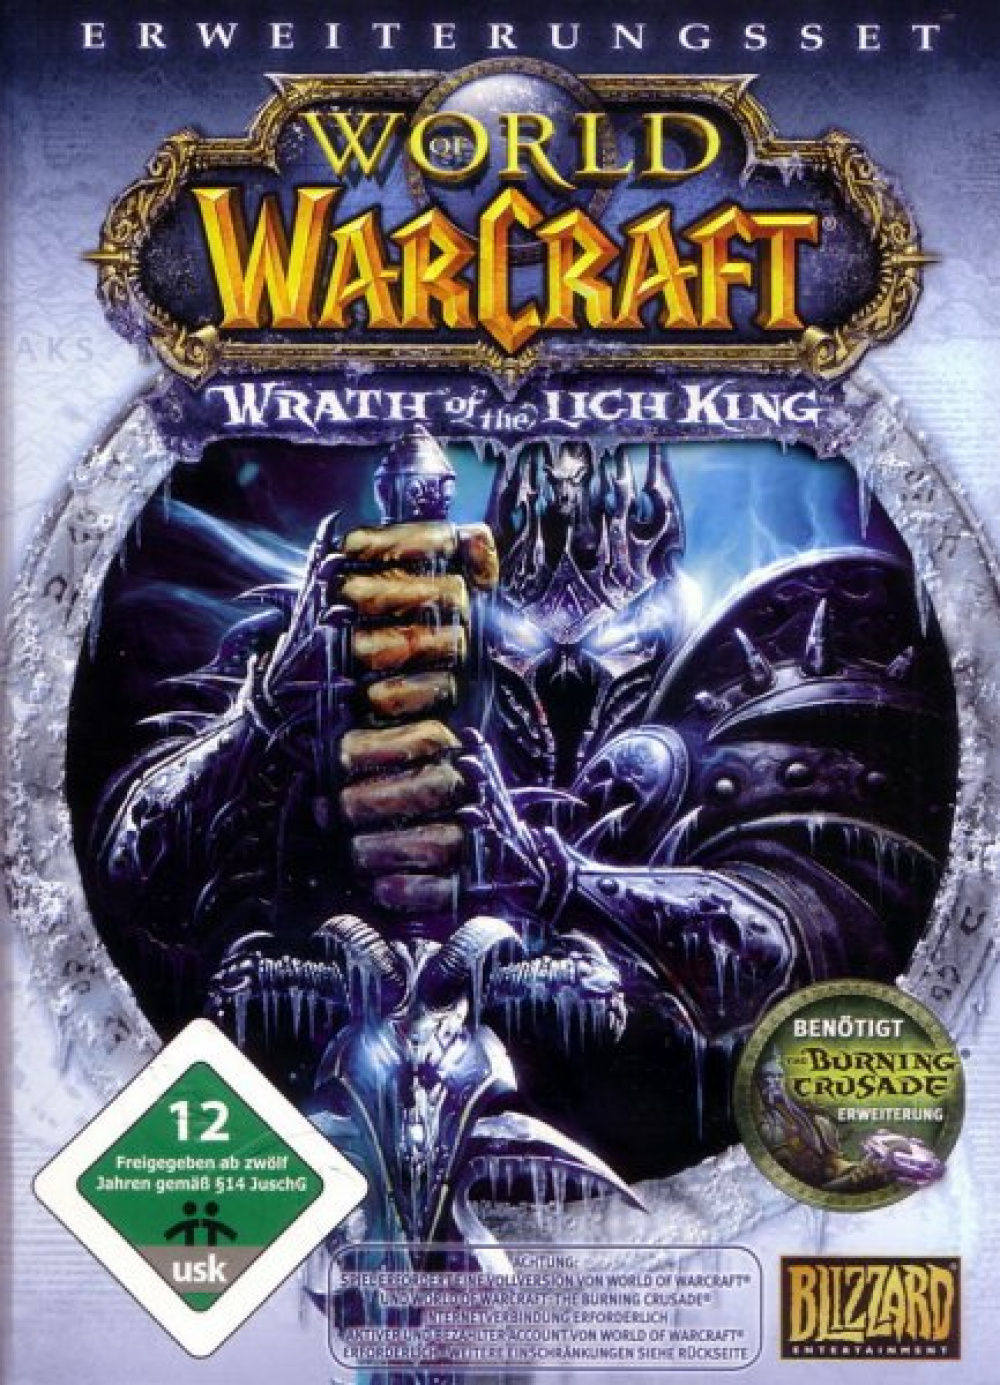 Sæt ud Pekkadillo Gammel mand World of Warcraft: Wrath of the Lich King | Video Game Reviews and Previews  PC, PS4, Xbox One and mobile